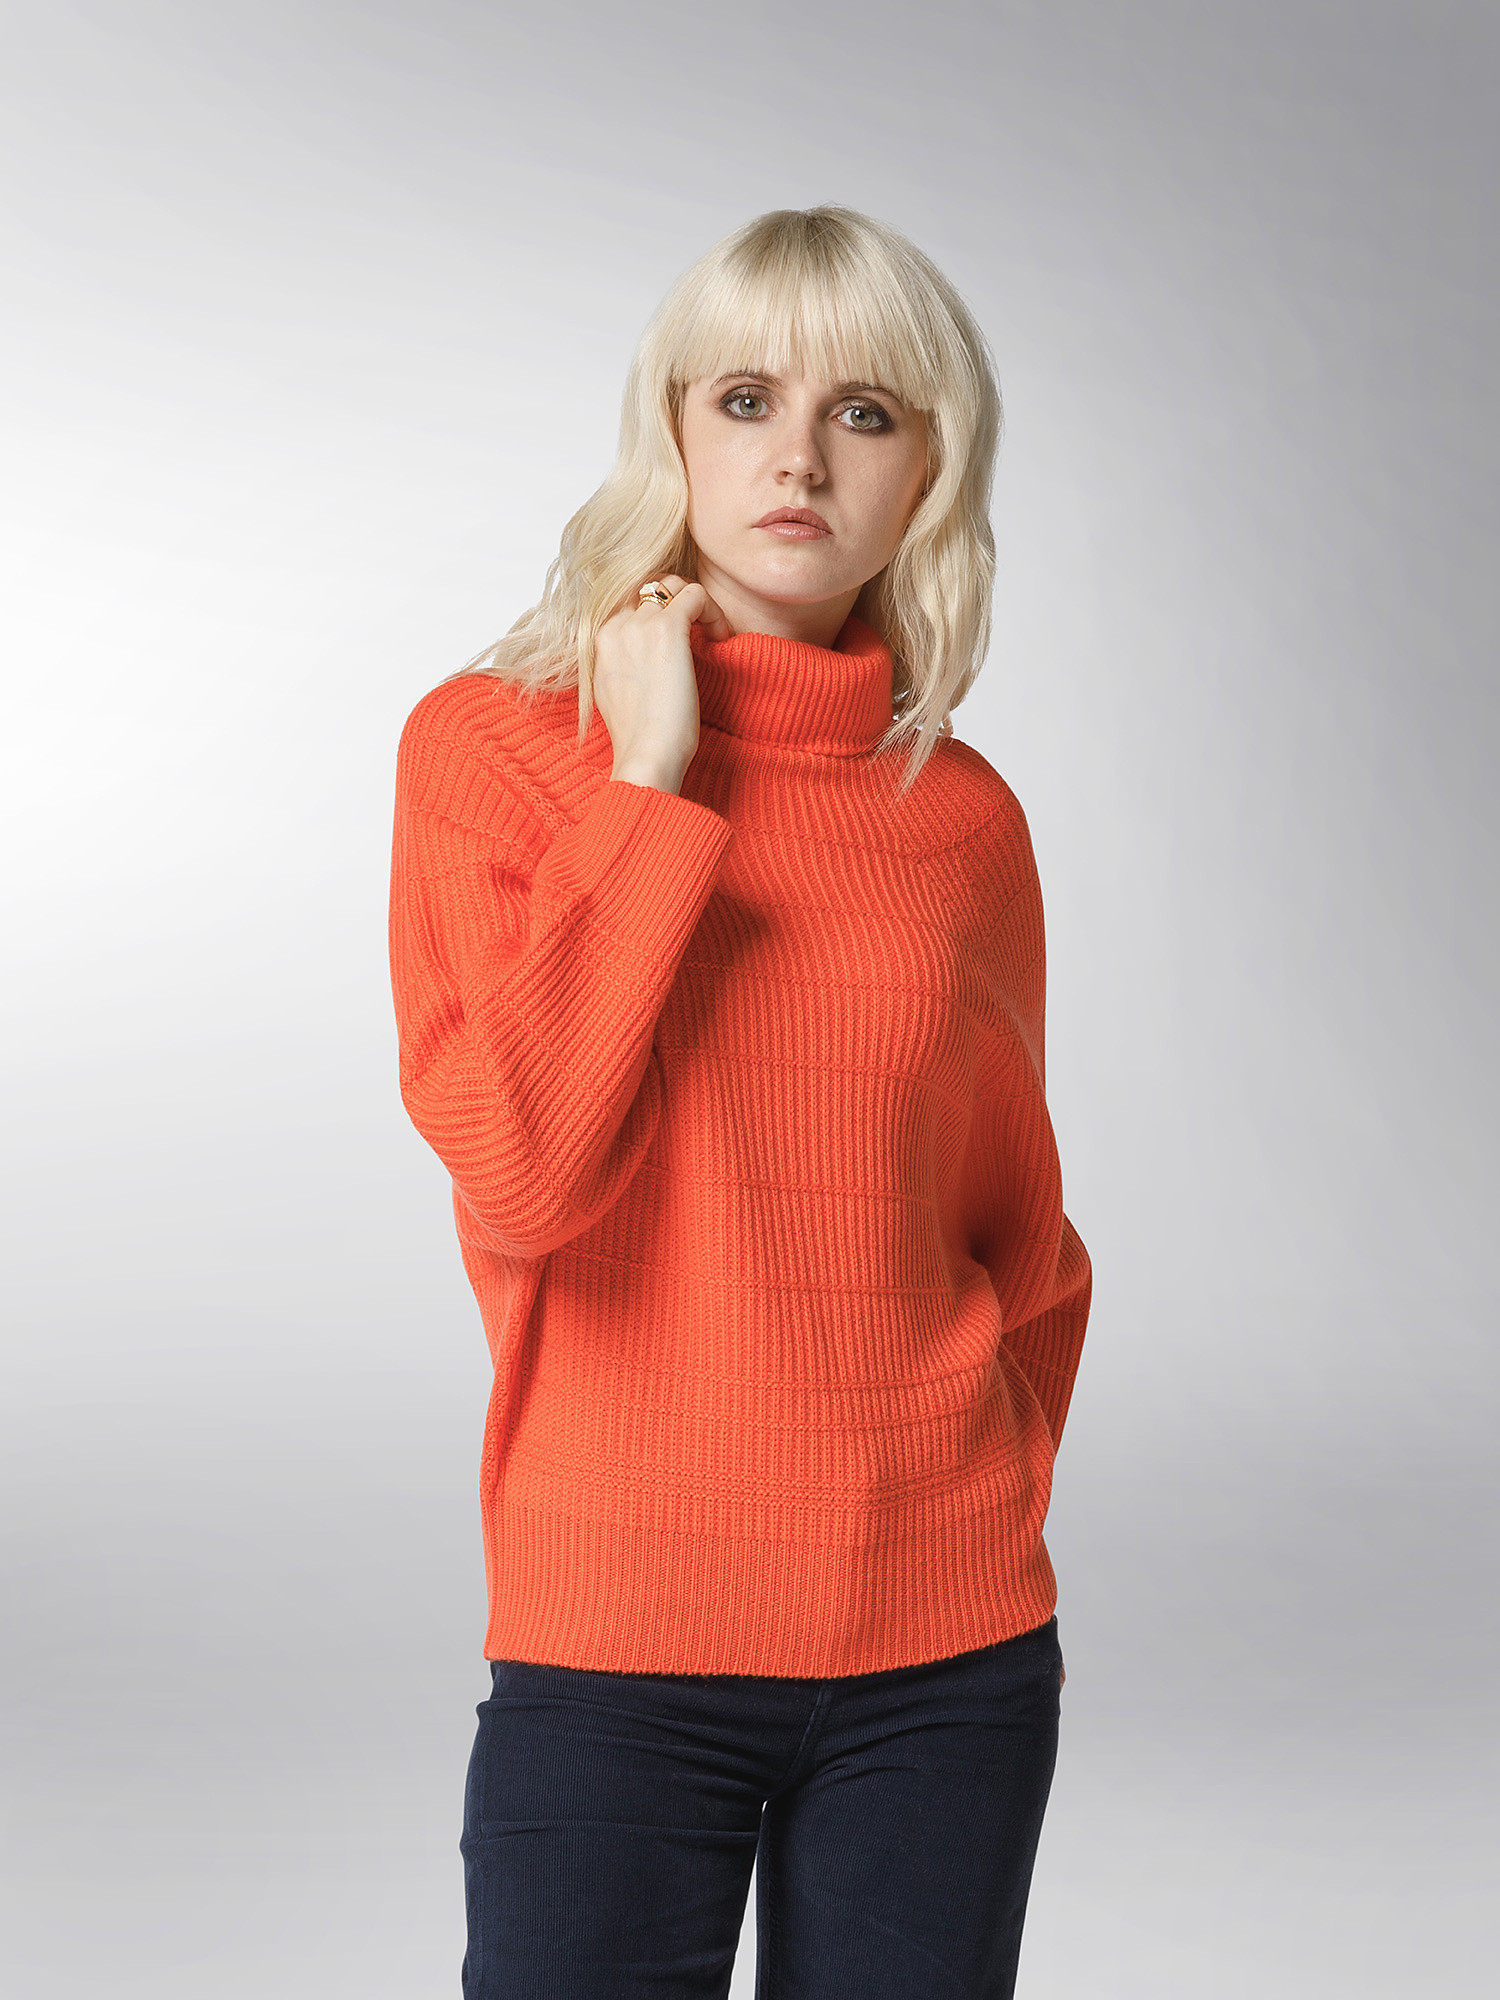 K Collection - Pullover dolcevita, Arancione, large image number 3